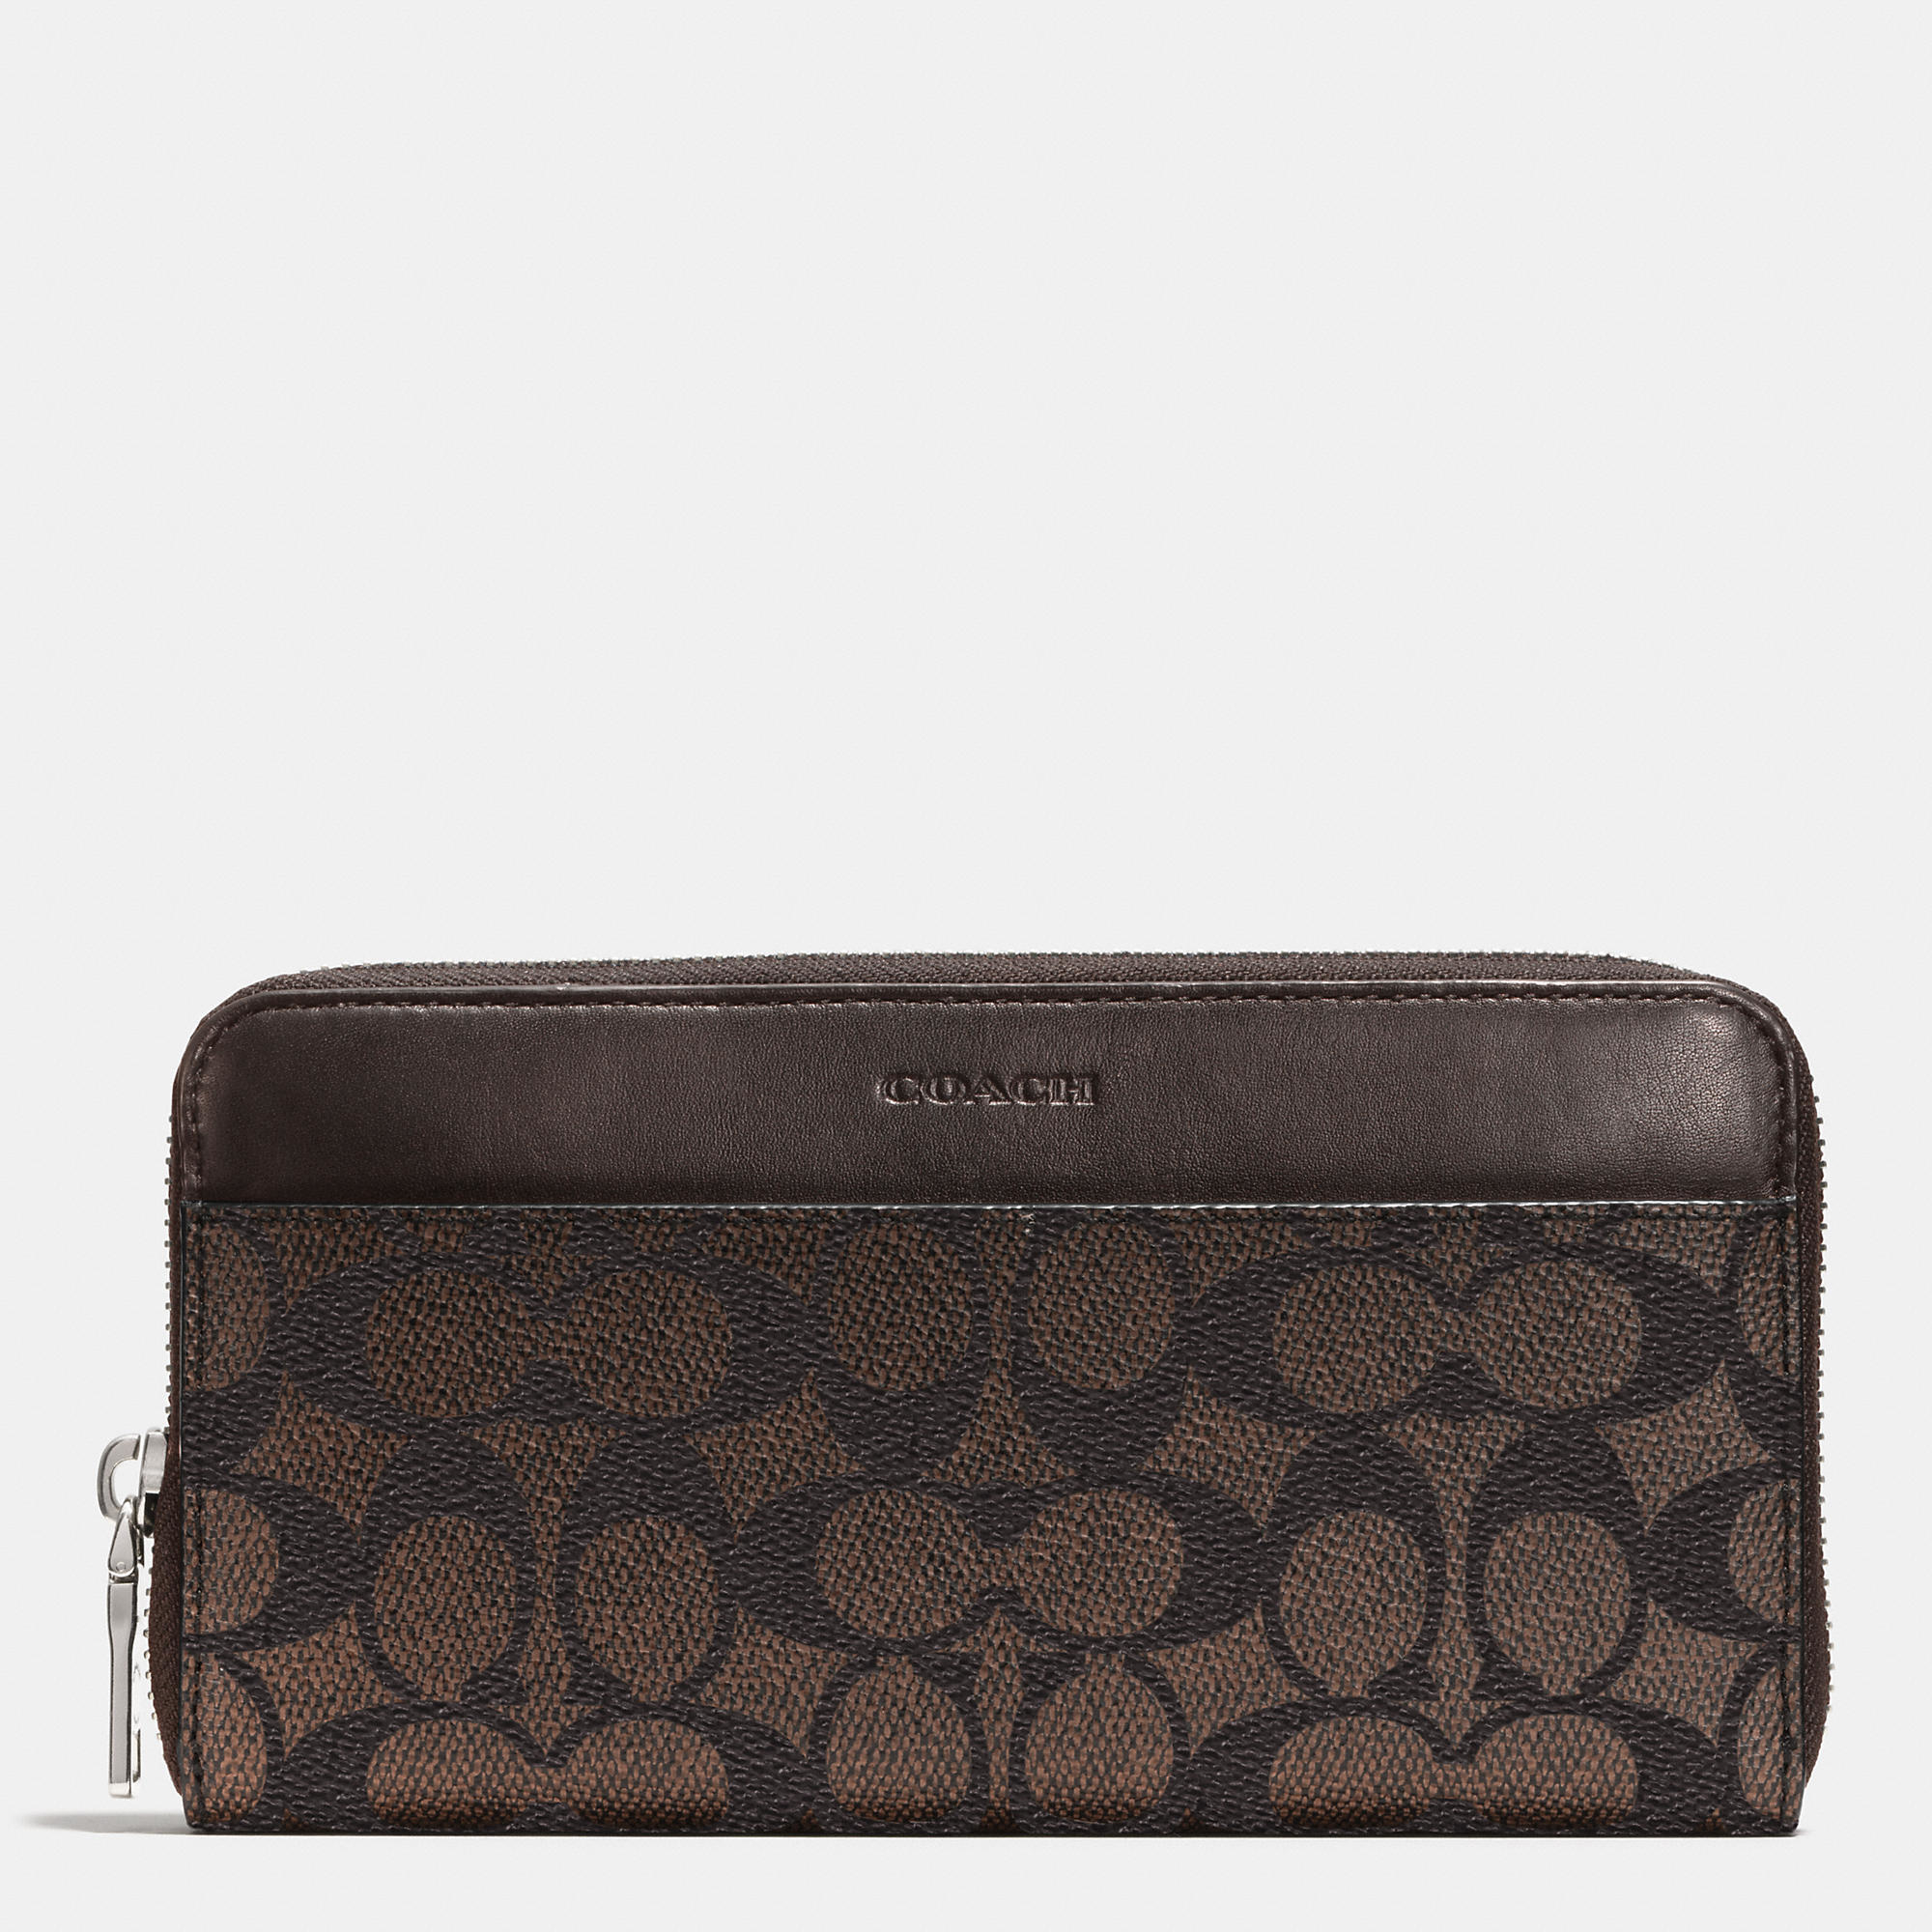 Lyst - Coach Accordion Wallet In Signature Canvas in Brown